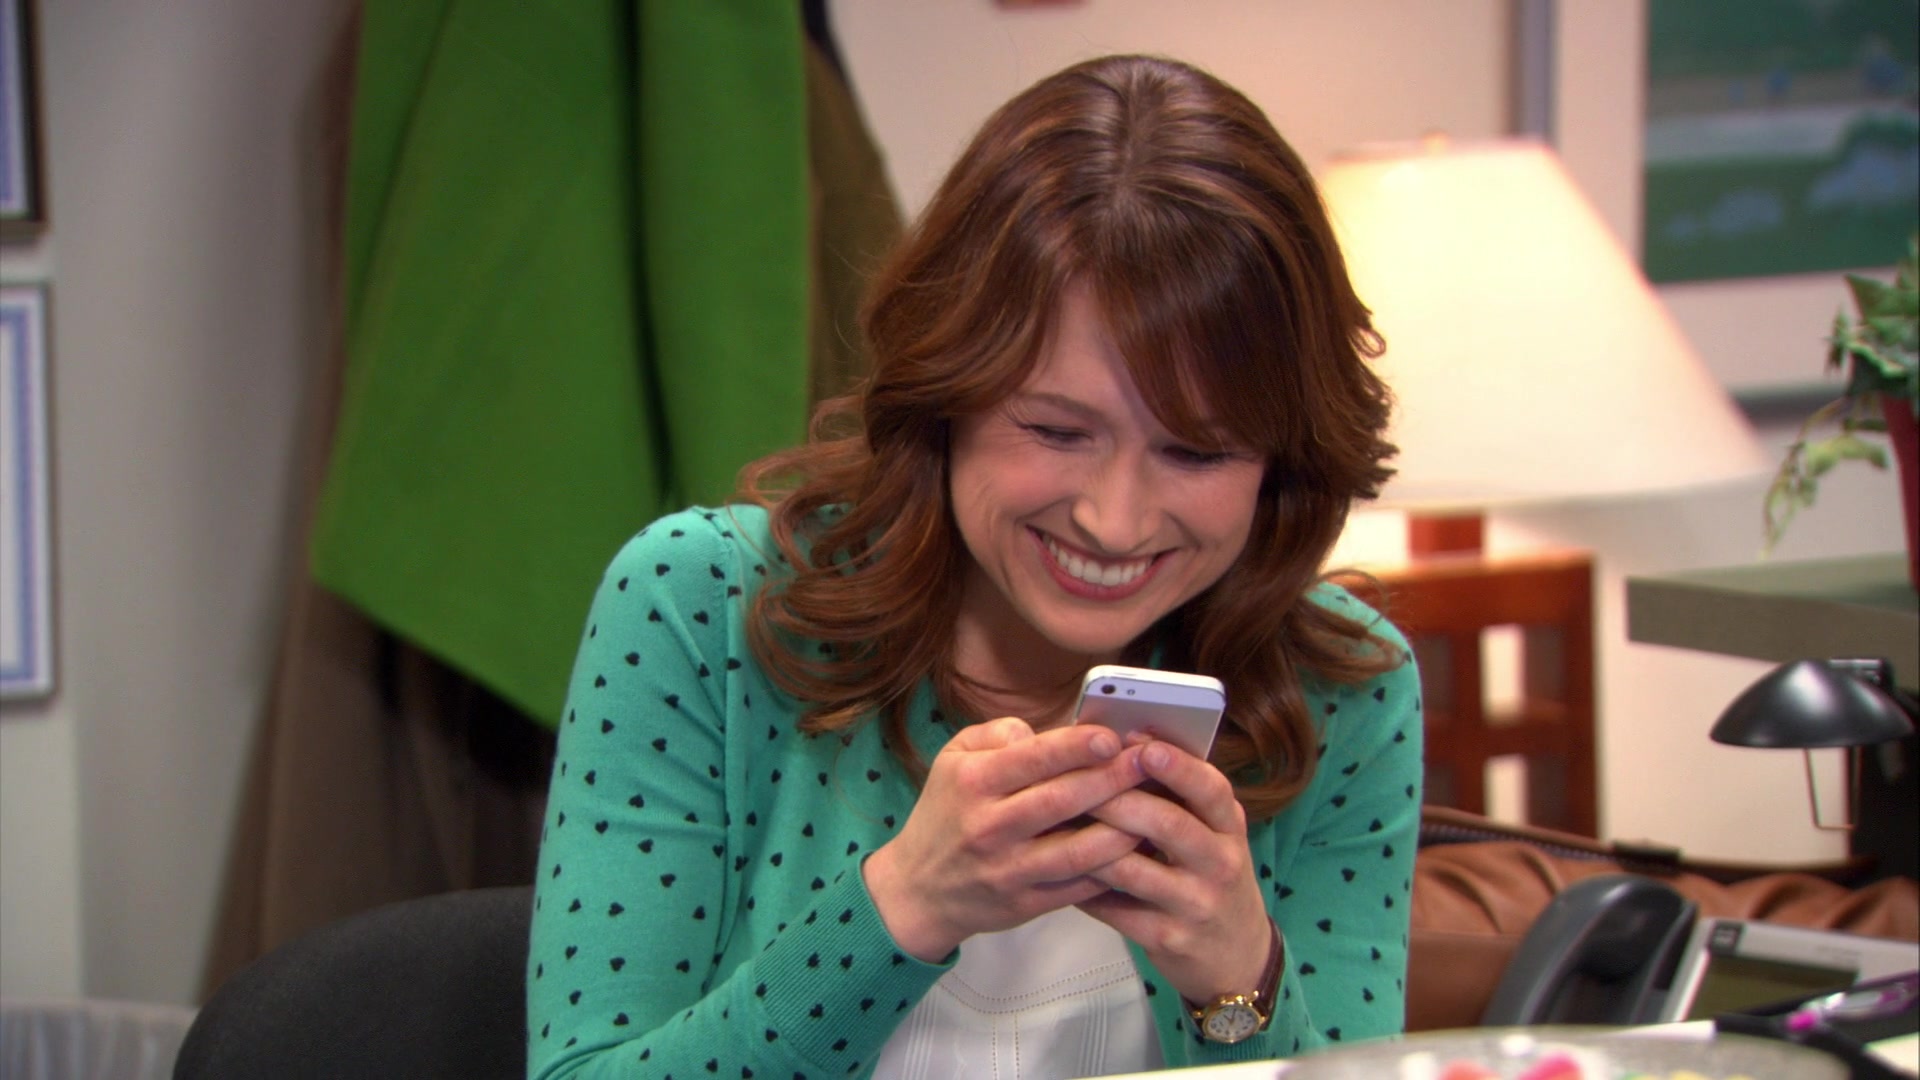 Apple IPhone Smartphone Used By Ellie Kemper (Erin Hannon) In The Office - ...